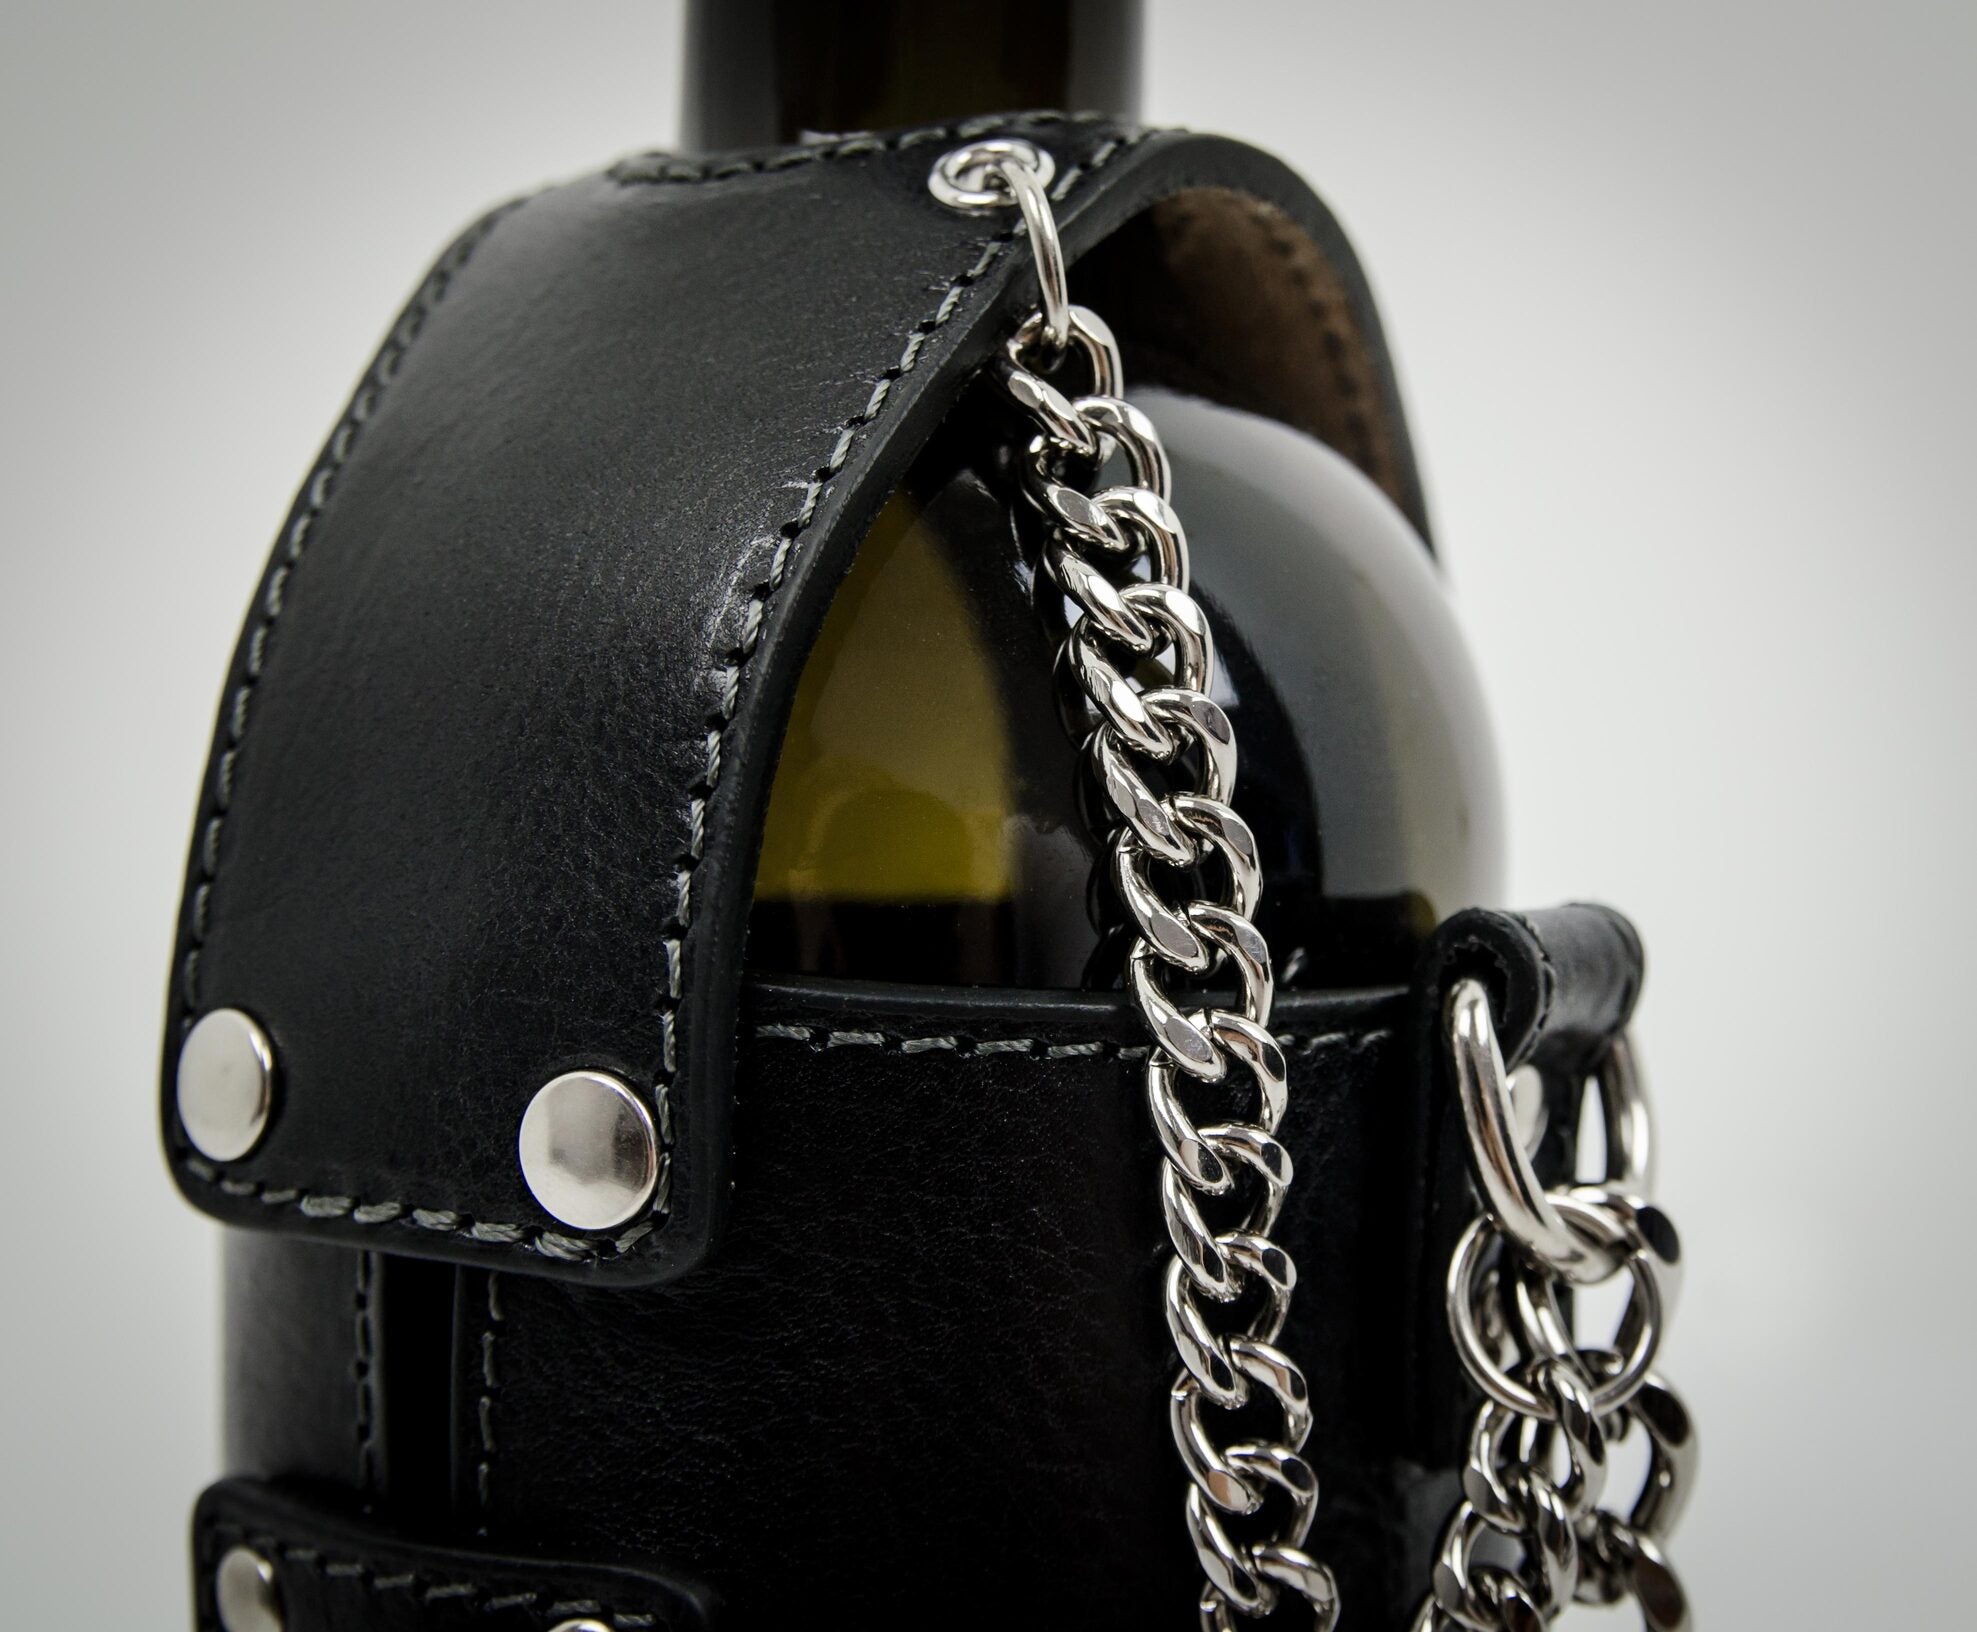 Leather Wine Tote - Saving Grapes